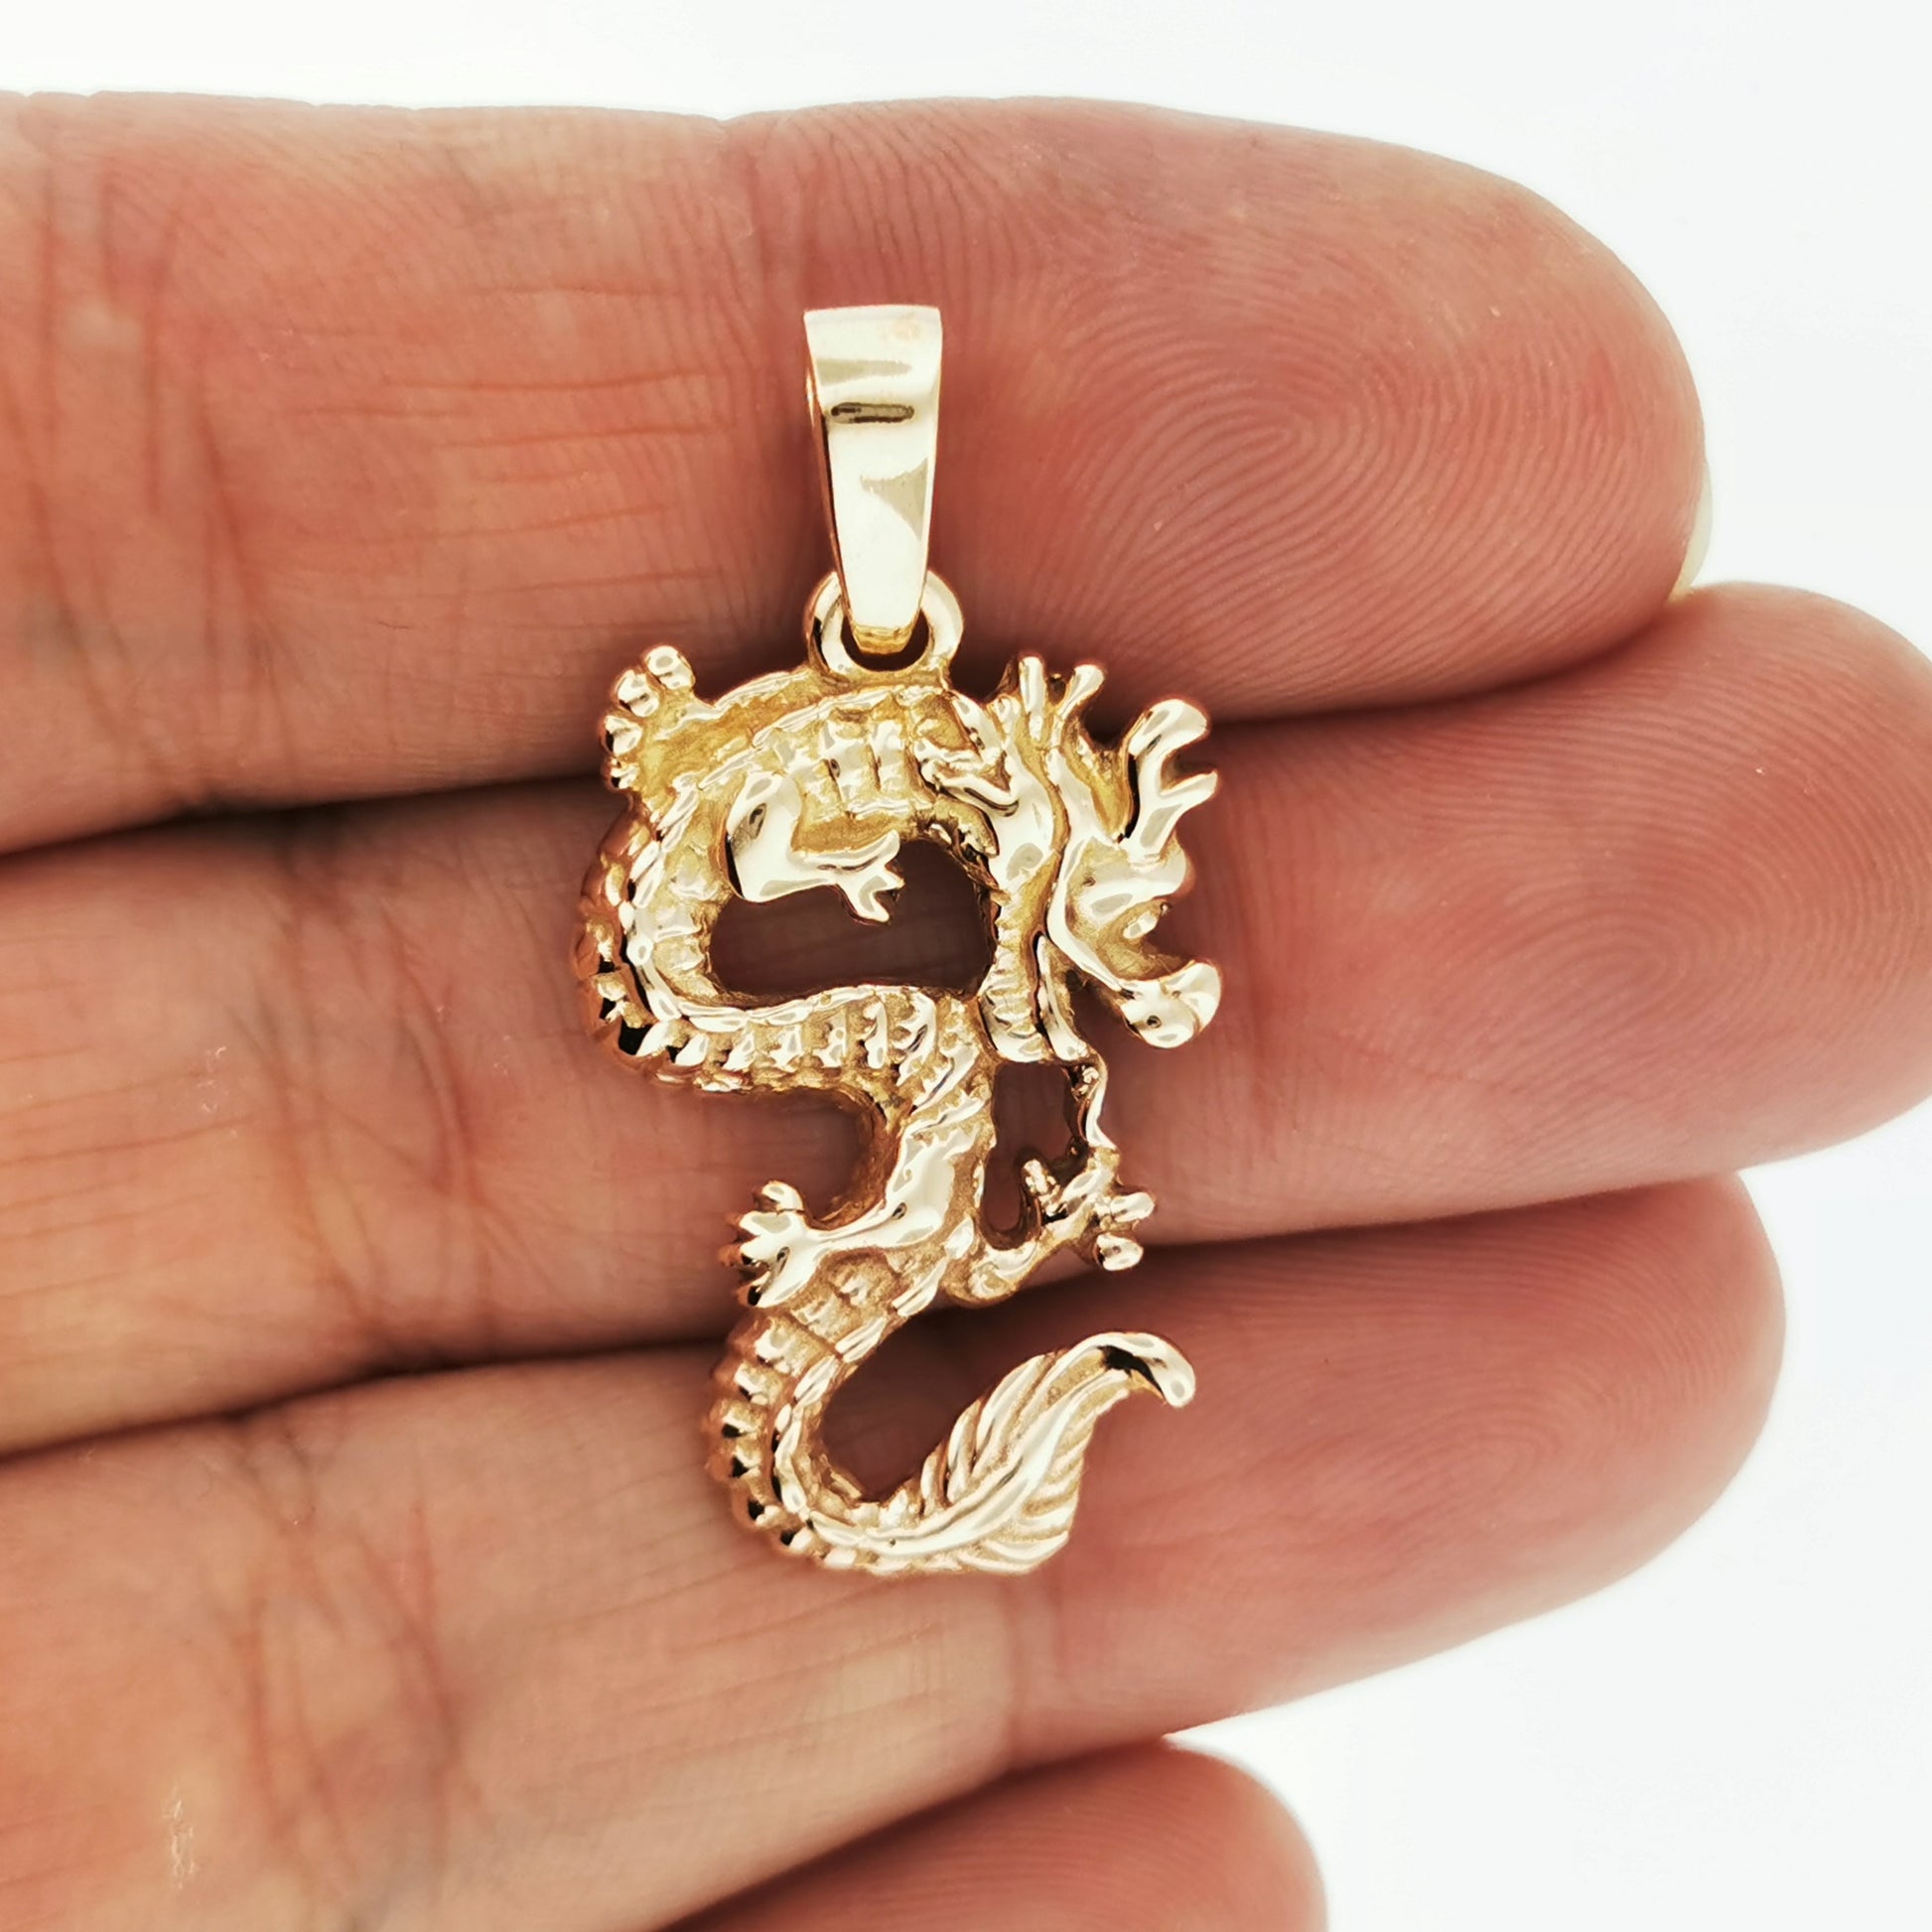 Asian Dragon Pendant In Sterling Silver or Antique Bronze, Year Of The Dragon Pendant, Year Of The Dragon Gift, Silver Dragon Pendant, Bronze Dragon Pendant, Asian Dragon Pendant, Chinese Dragon Pendant, Chinese Dragon Jewelry, Chinese Dragon Jewellery, Dragon Lover Jewelry, Dragon Lover Jewellery